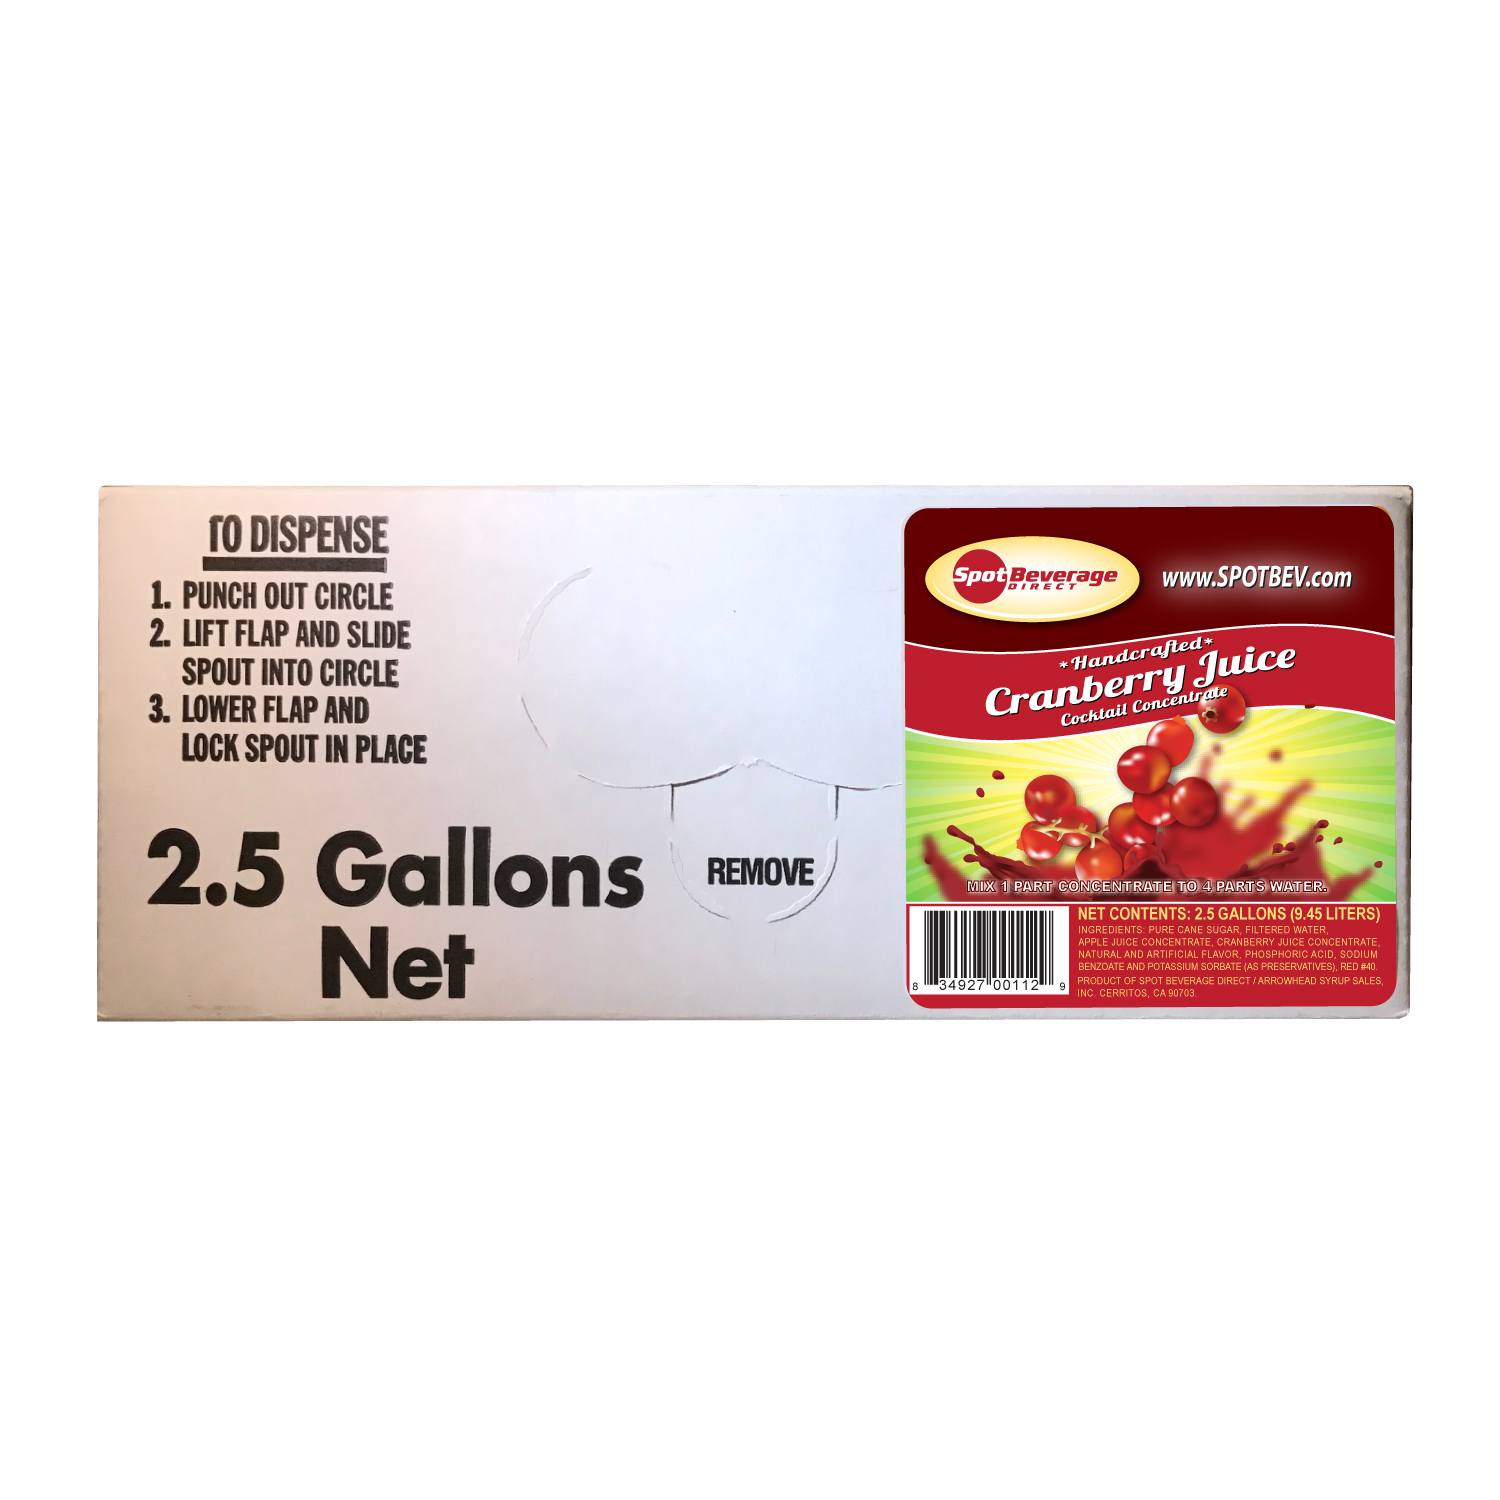 Spot Premium Cranberry Juice Cocktail 2.5 gal. Bag-n-Box (1 to 4 Concentrate)